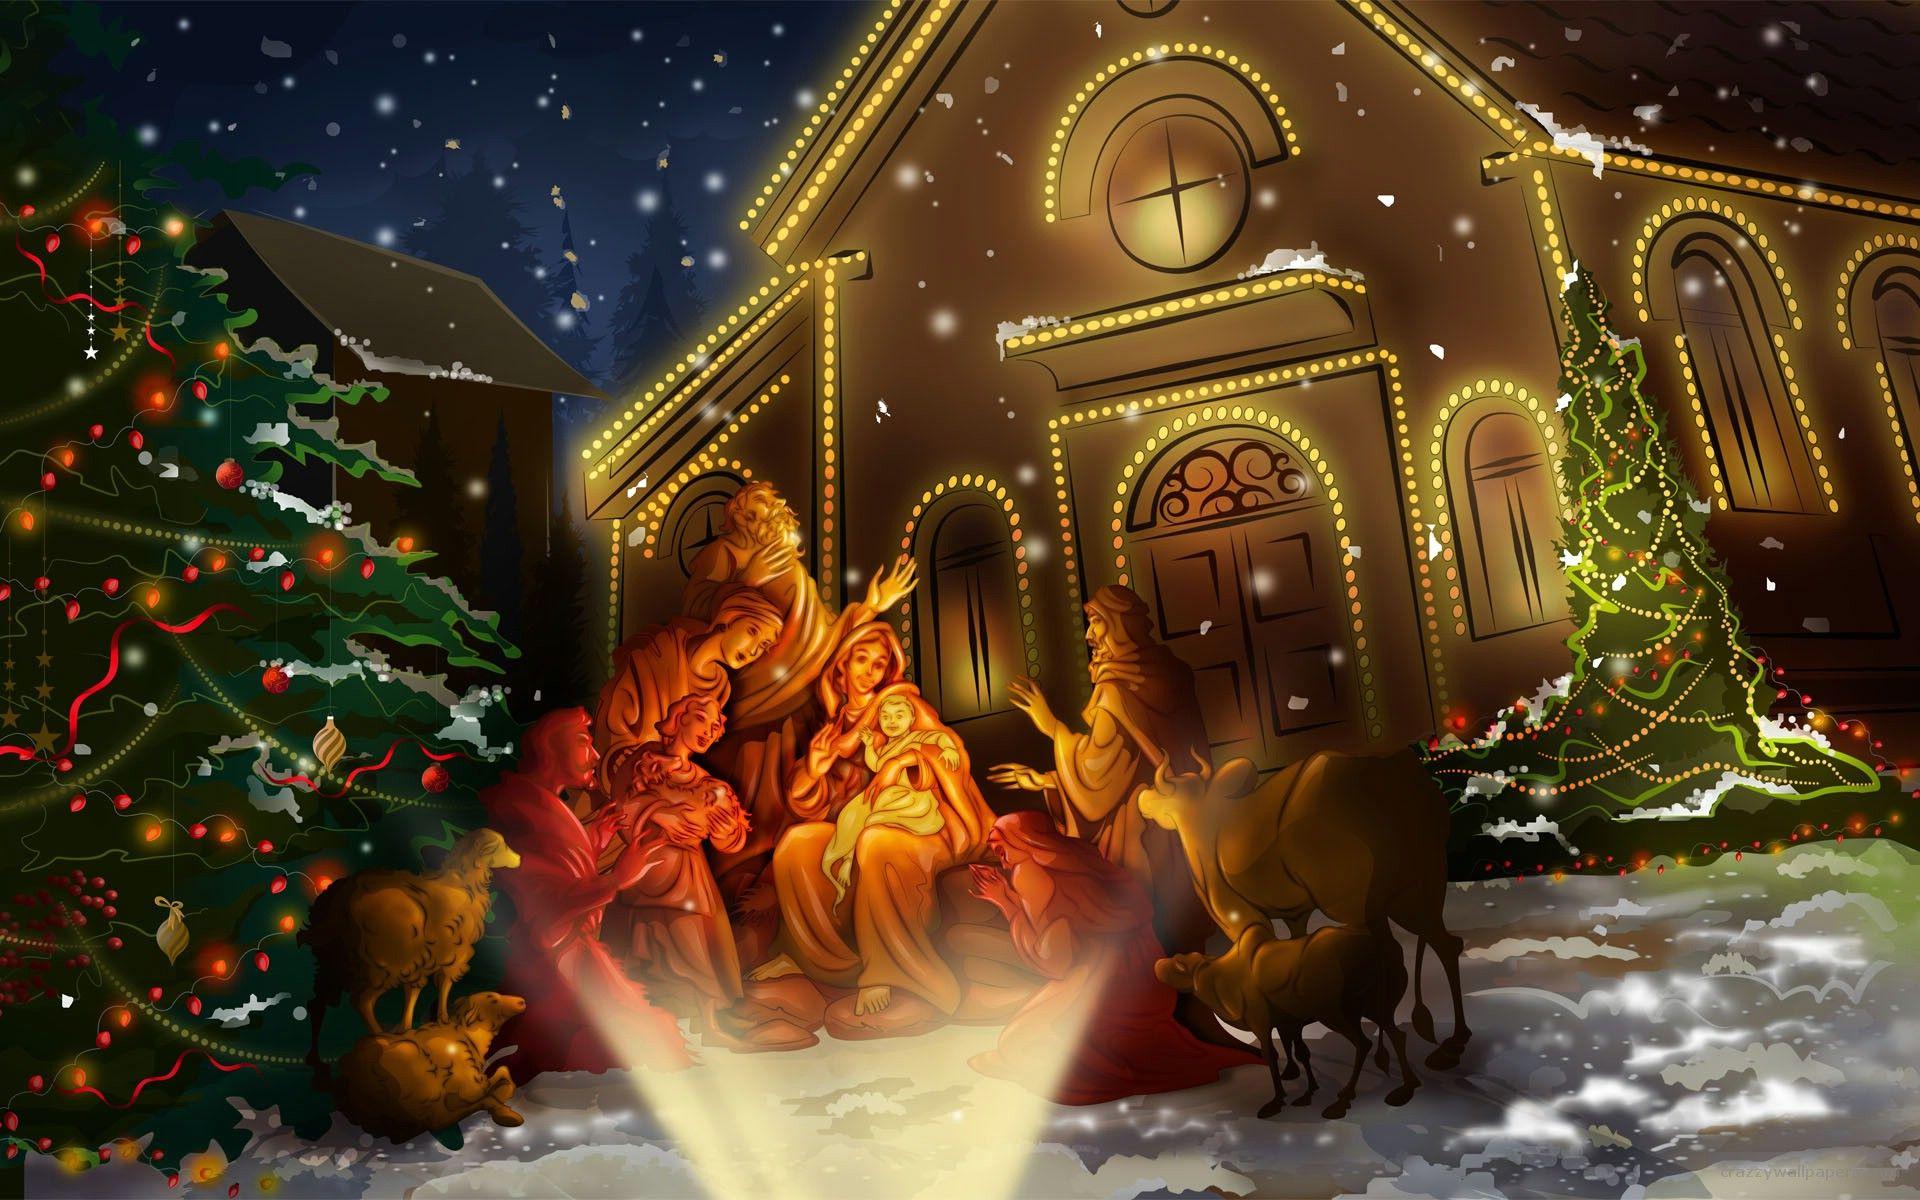 Christmas is an annual commemoration of the birth of Jesus